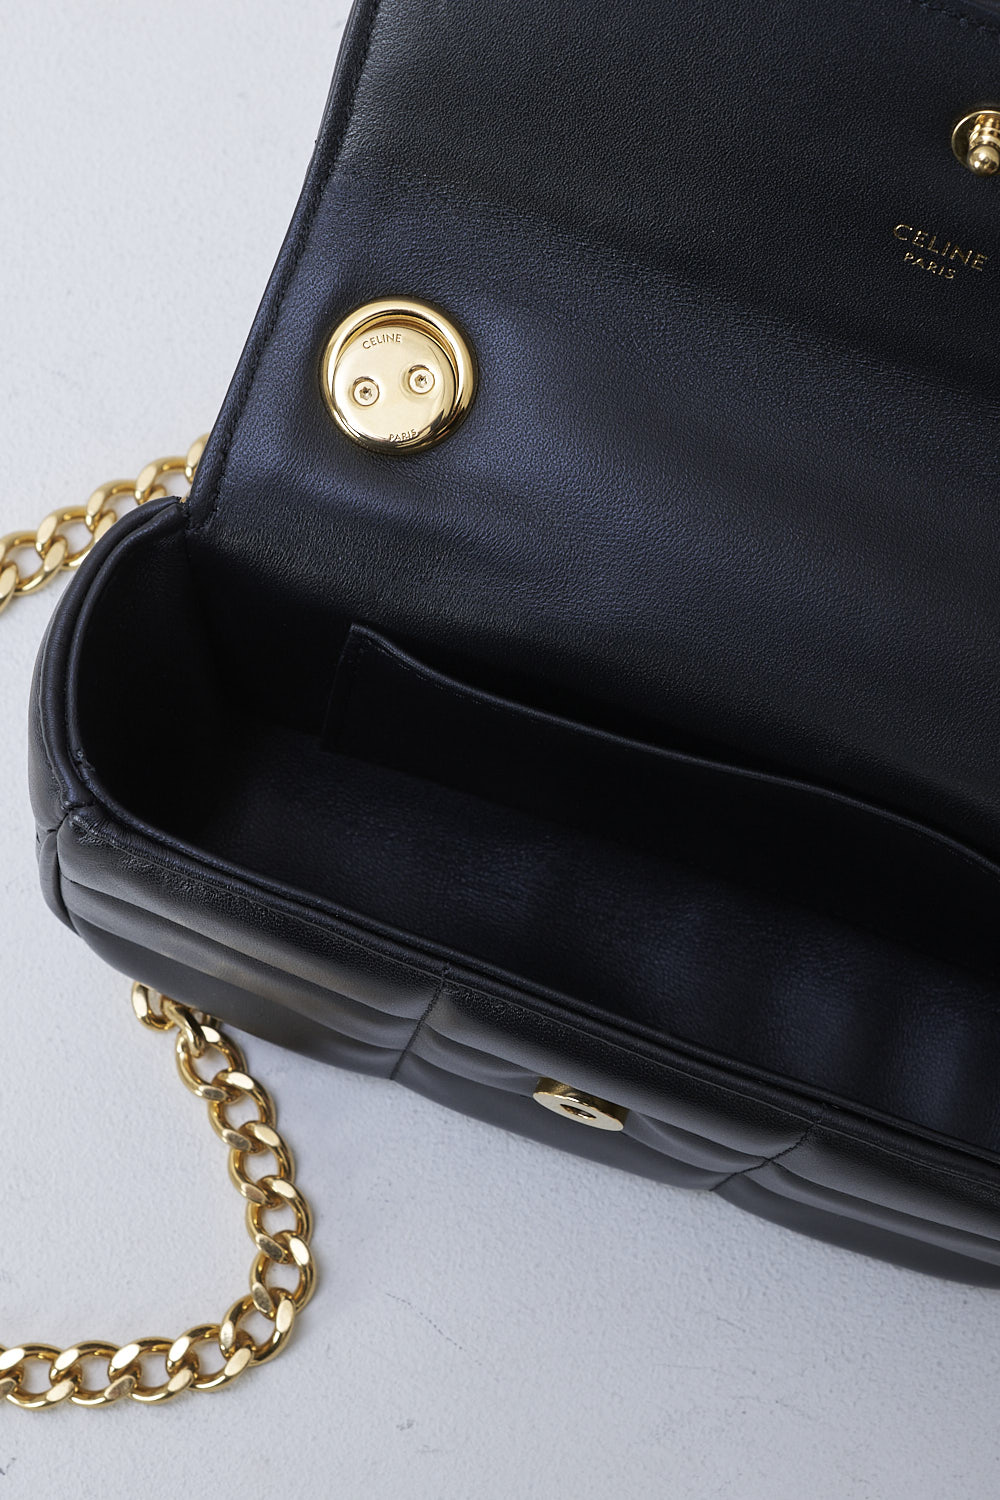 CELINE, BLACK MATELASSÉ MINI CHAIN SHOULDER BAG, 10L333EWJ_38NO, Black, Detail 1, This black matelassé mini shoulder bag has gold-tone metal hardware with the brand's lettering on the front and a gold chain shoulder strap. The bag has a snap button closure. The flap opens to the main compartment with a inner pocket to the backside.  
